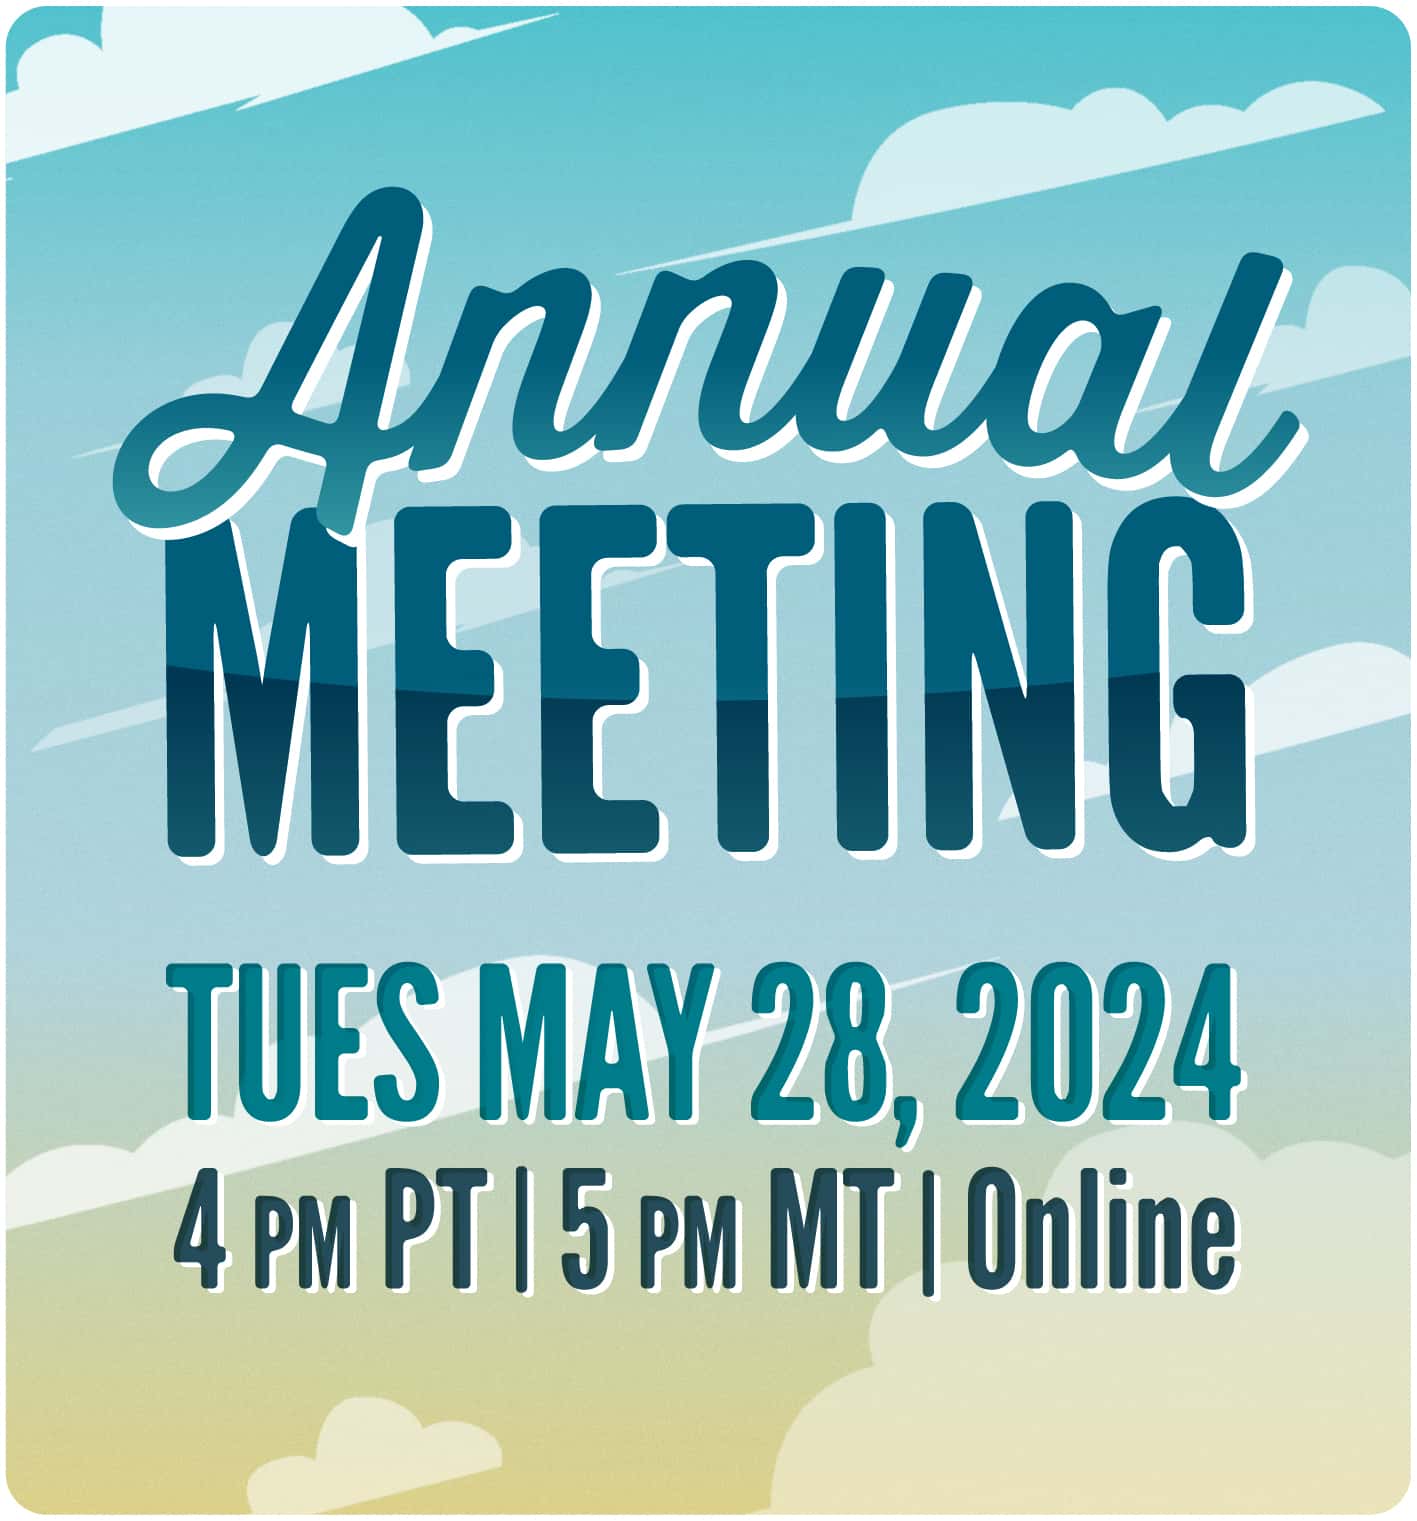 Annual Meeting Tuesday May 28, 4pm PT, 5pm MT, Online